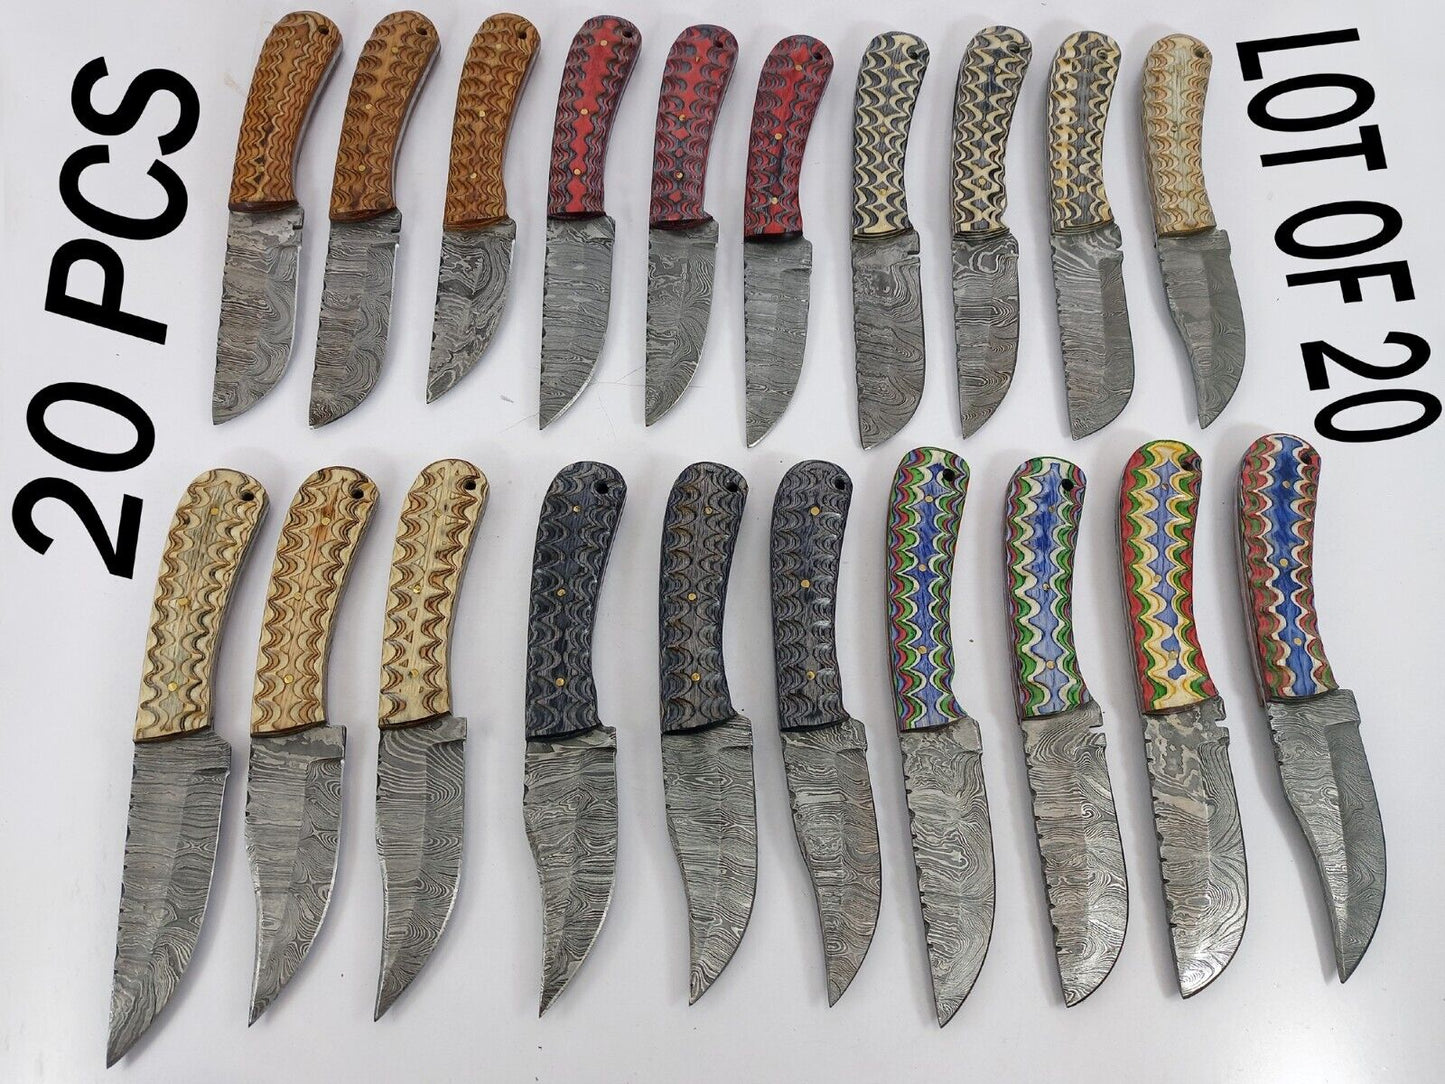 20 pieces Damascus steel fixed blade skinning knives lot with Leather sheath. Over 150 inches long Damascus steel knives in assorted colors